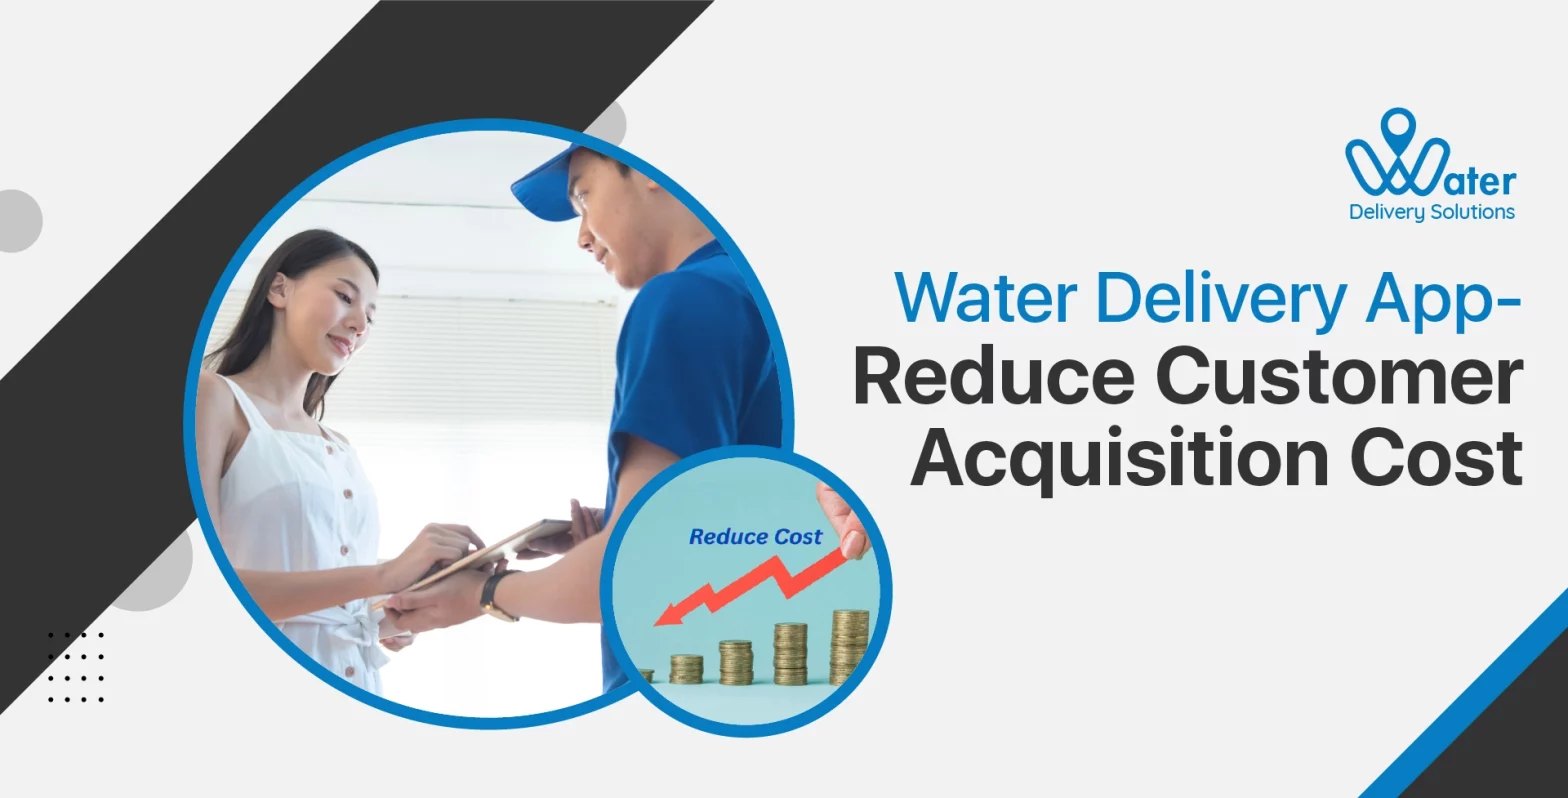 wds-founded-by-ravi-garg-website-insights-water-delivery-app-reduce-the-customer-acqusition-cost